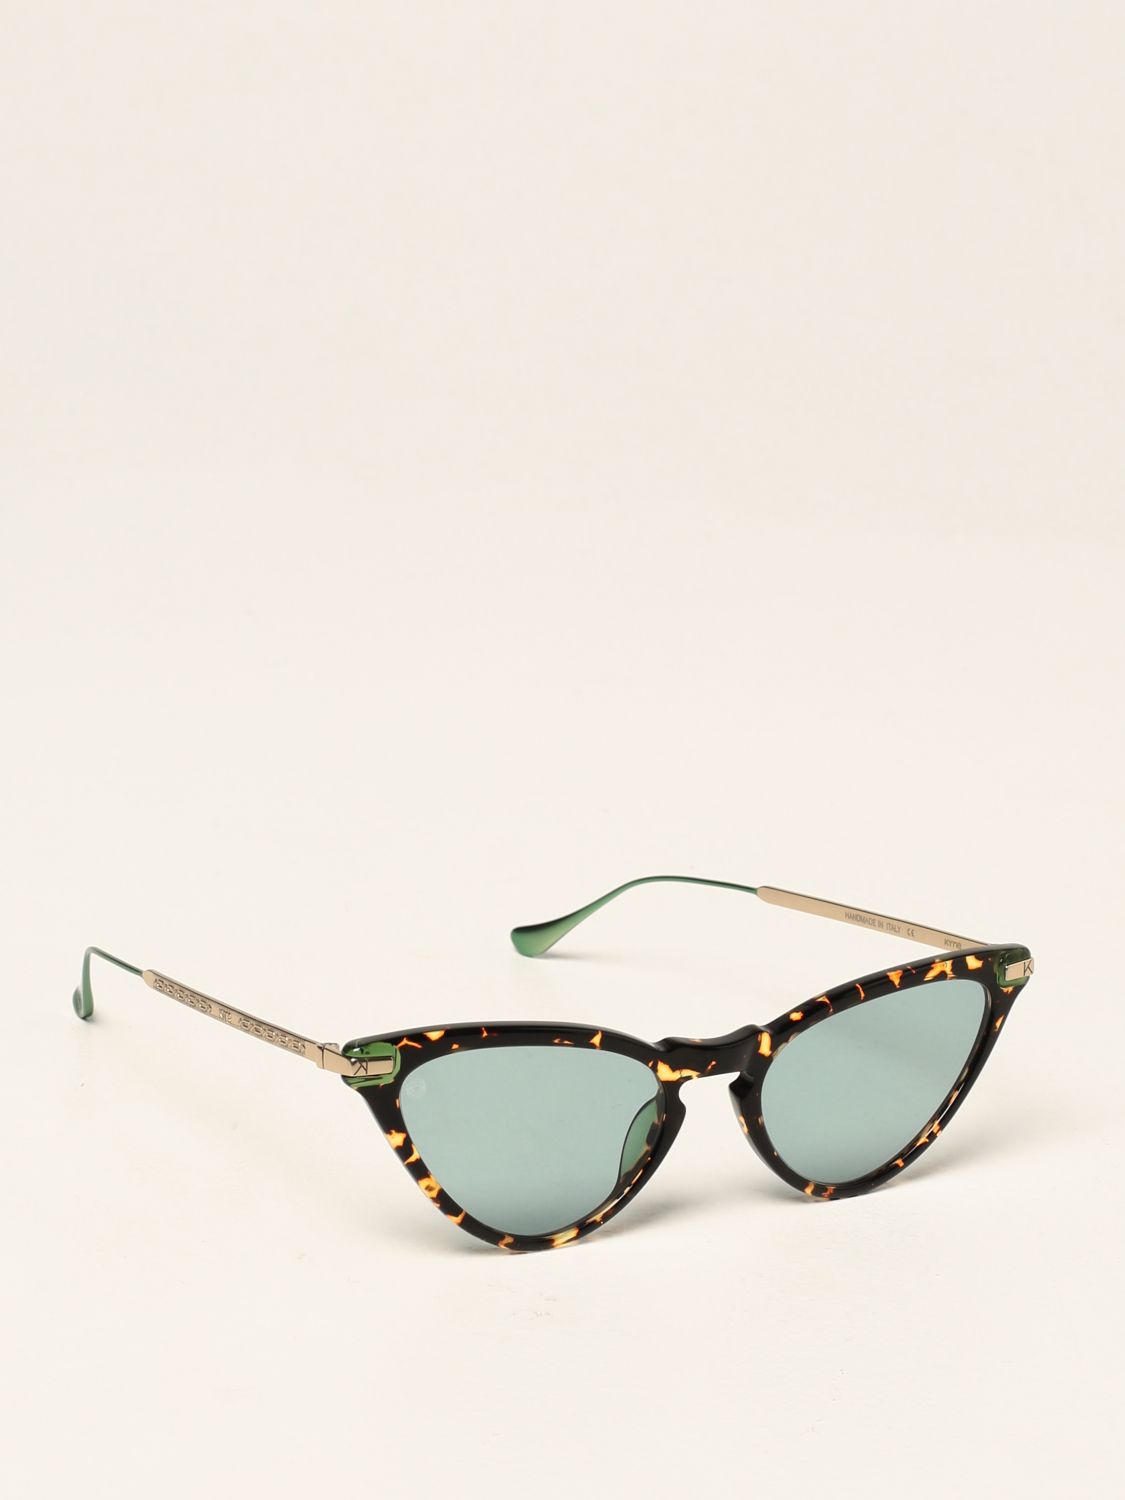 Kyme Kyme sunglasses in acetate and metal